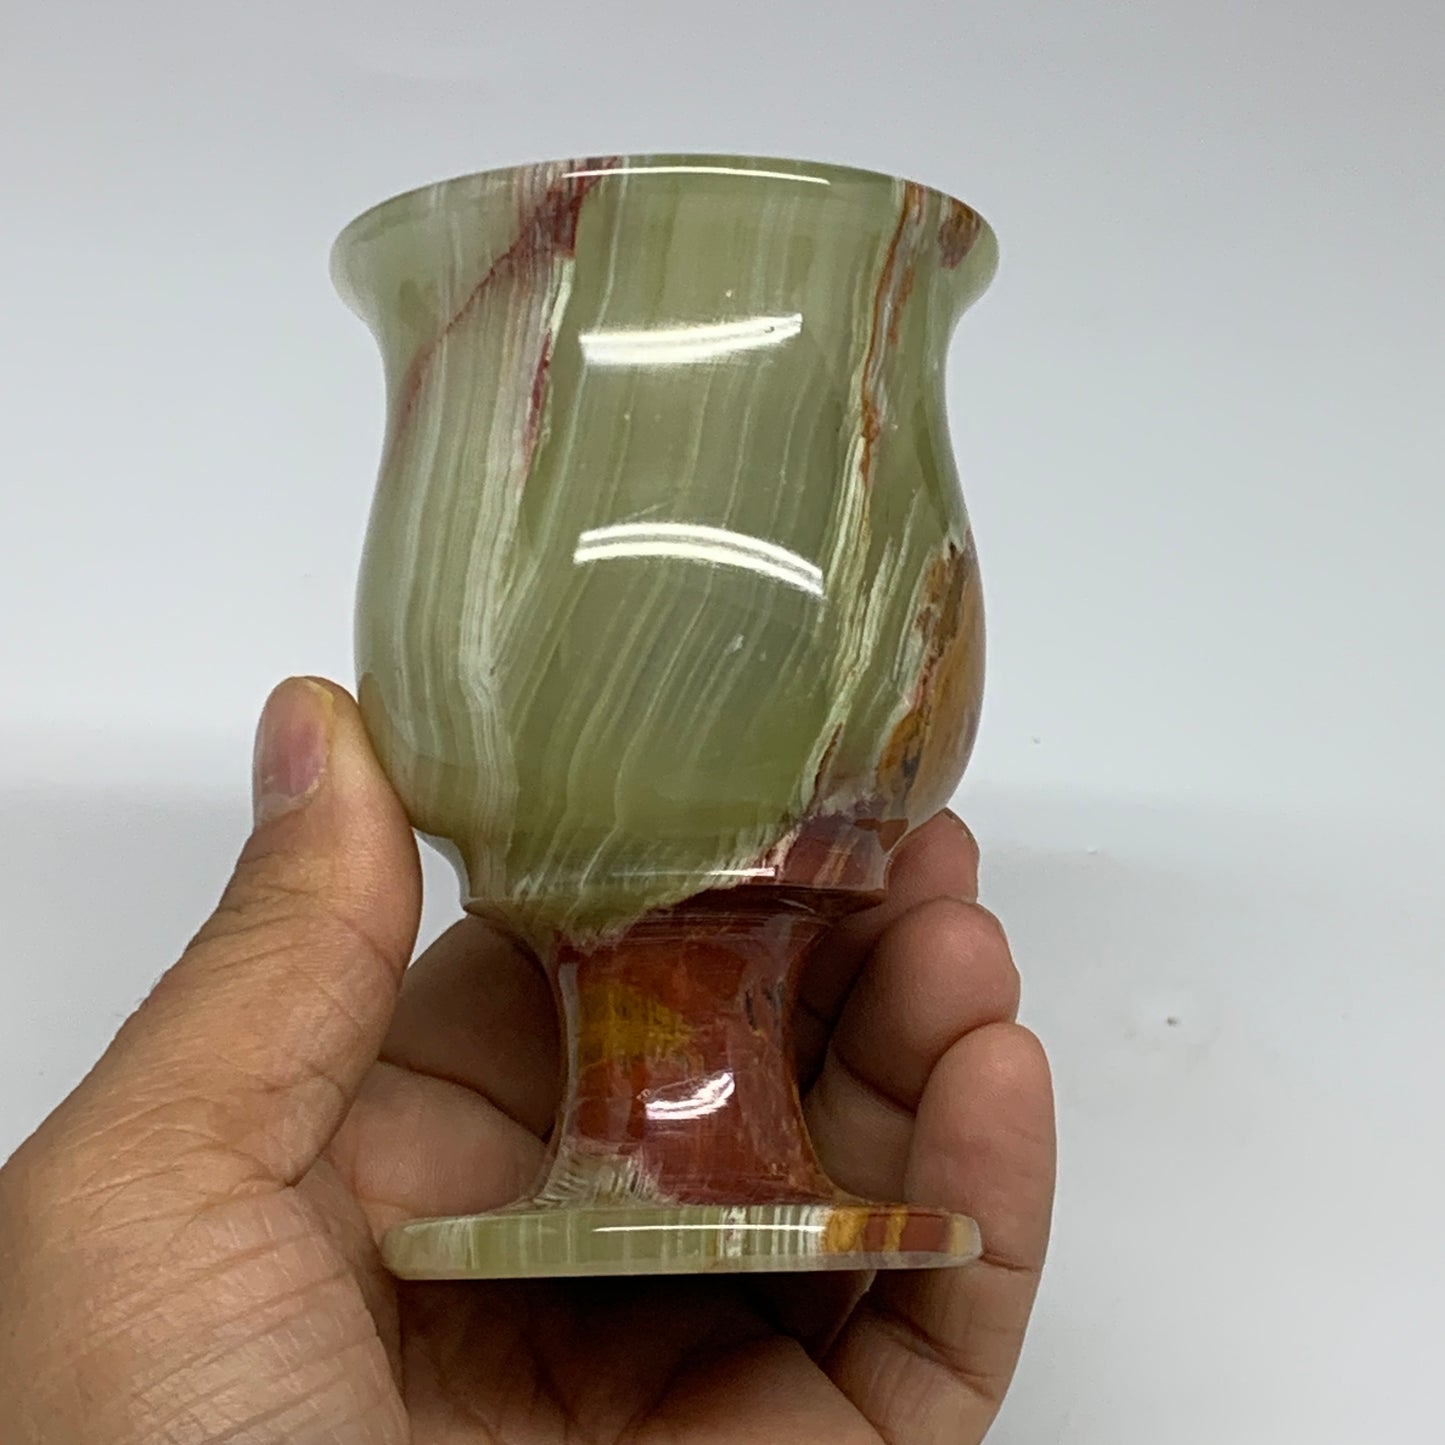 202g, 3.8"x2.3" Natural Green Onyx Cup Gemstone from Afghanistan, B3206